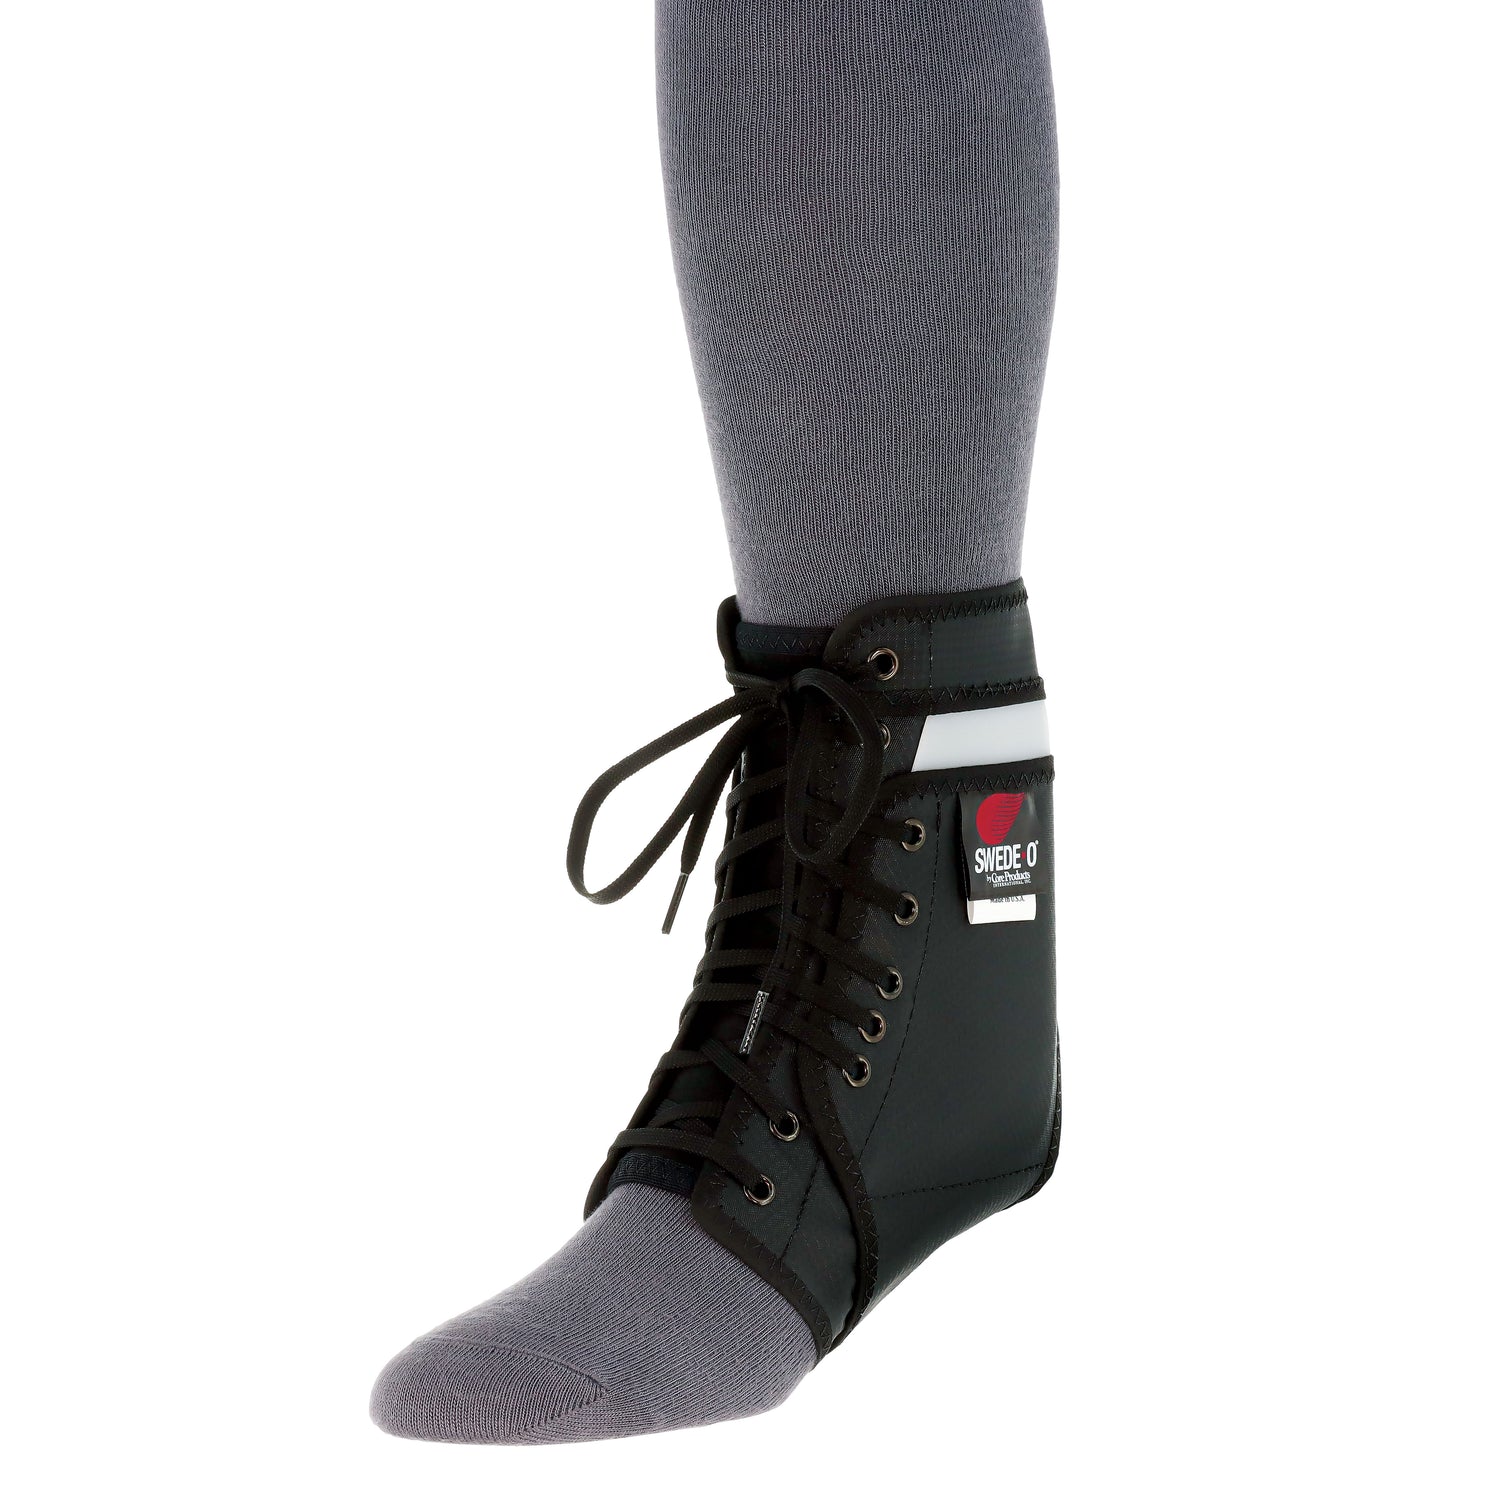 Ankle Support w/Stabilizer